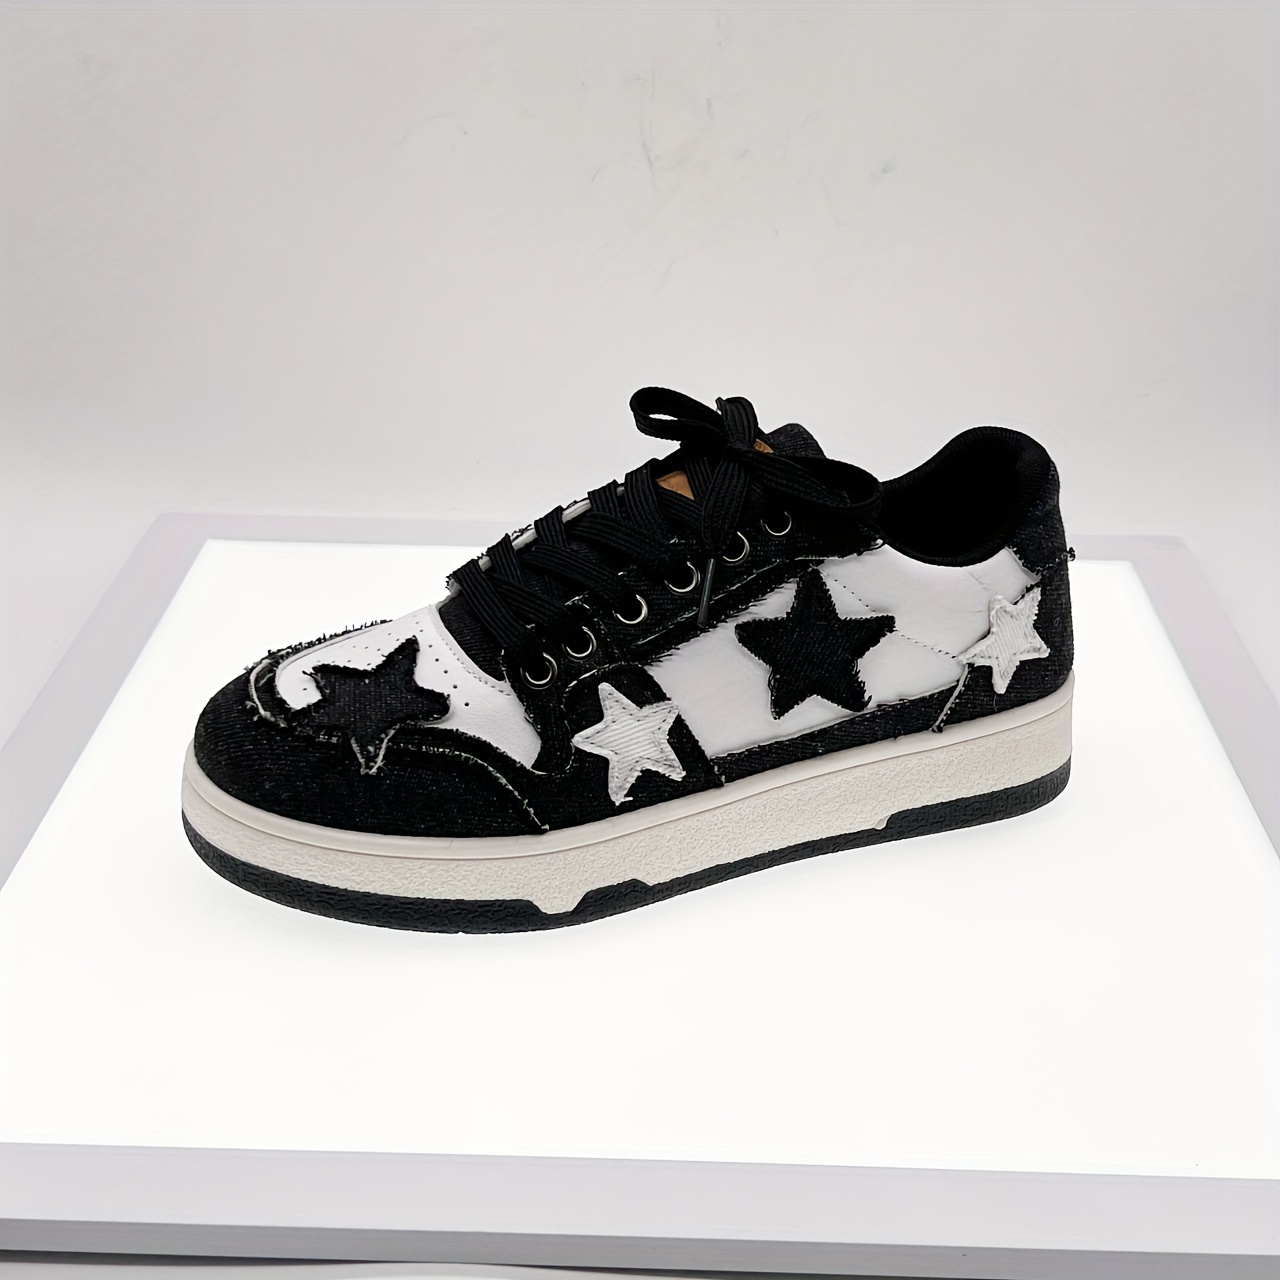 

Women's Skate Shoes With Stars Design, Colorblock Low Top Flatform Sneakers, Casual Trendy Sports Shoes